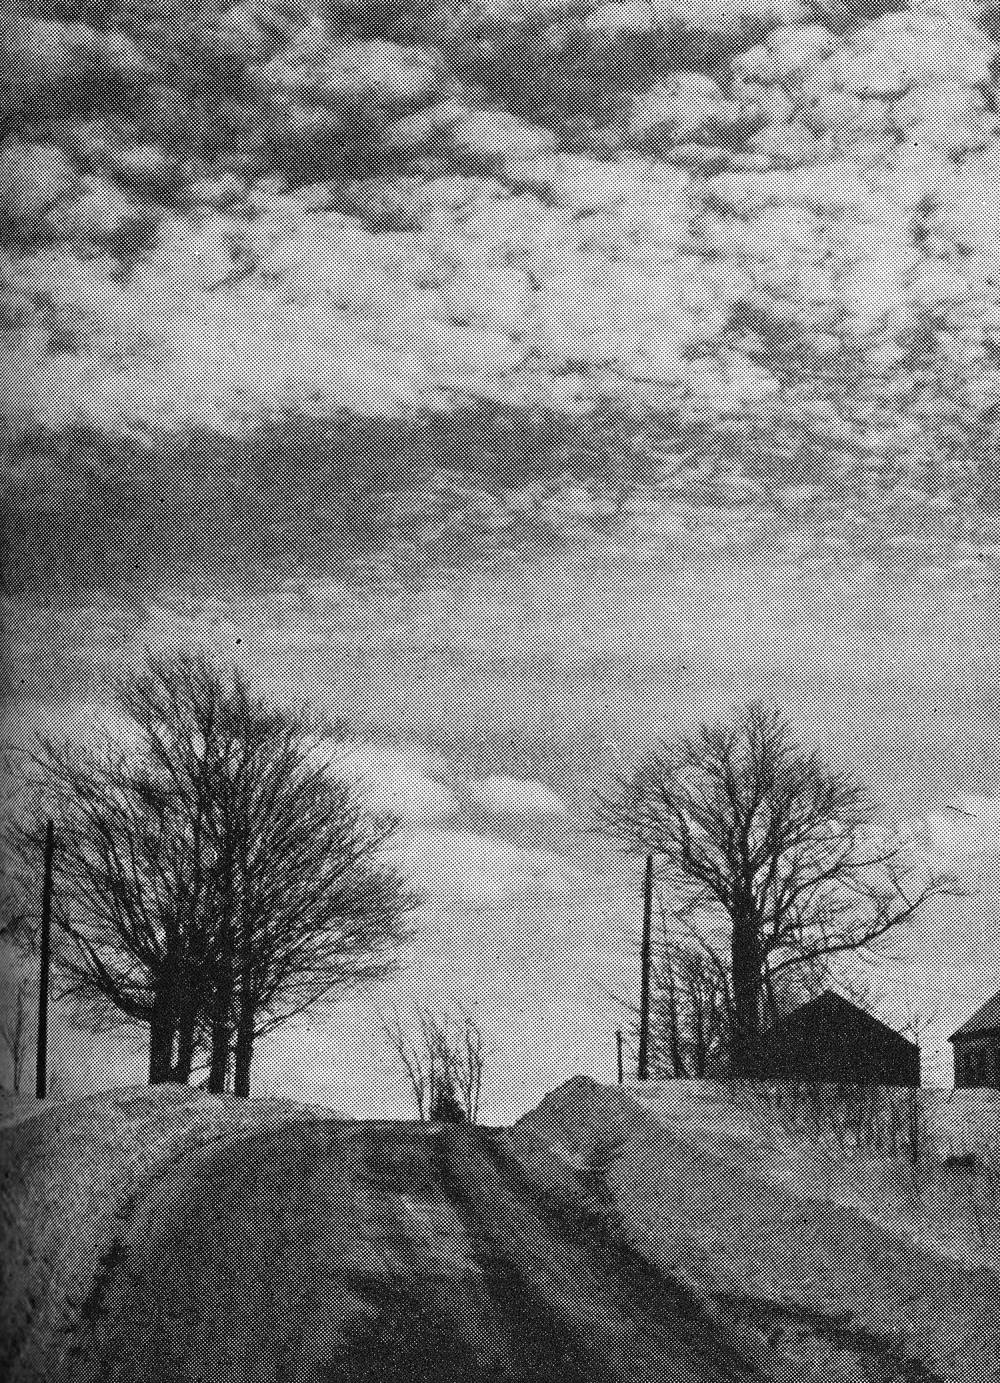 A black and white image of a country road with barren trees on either side of the road and a couple of barns in the distance on the right hand side. There are light clouds in the sky. 